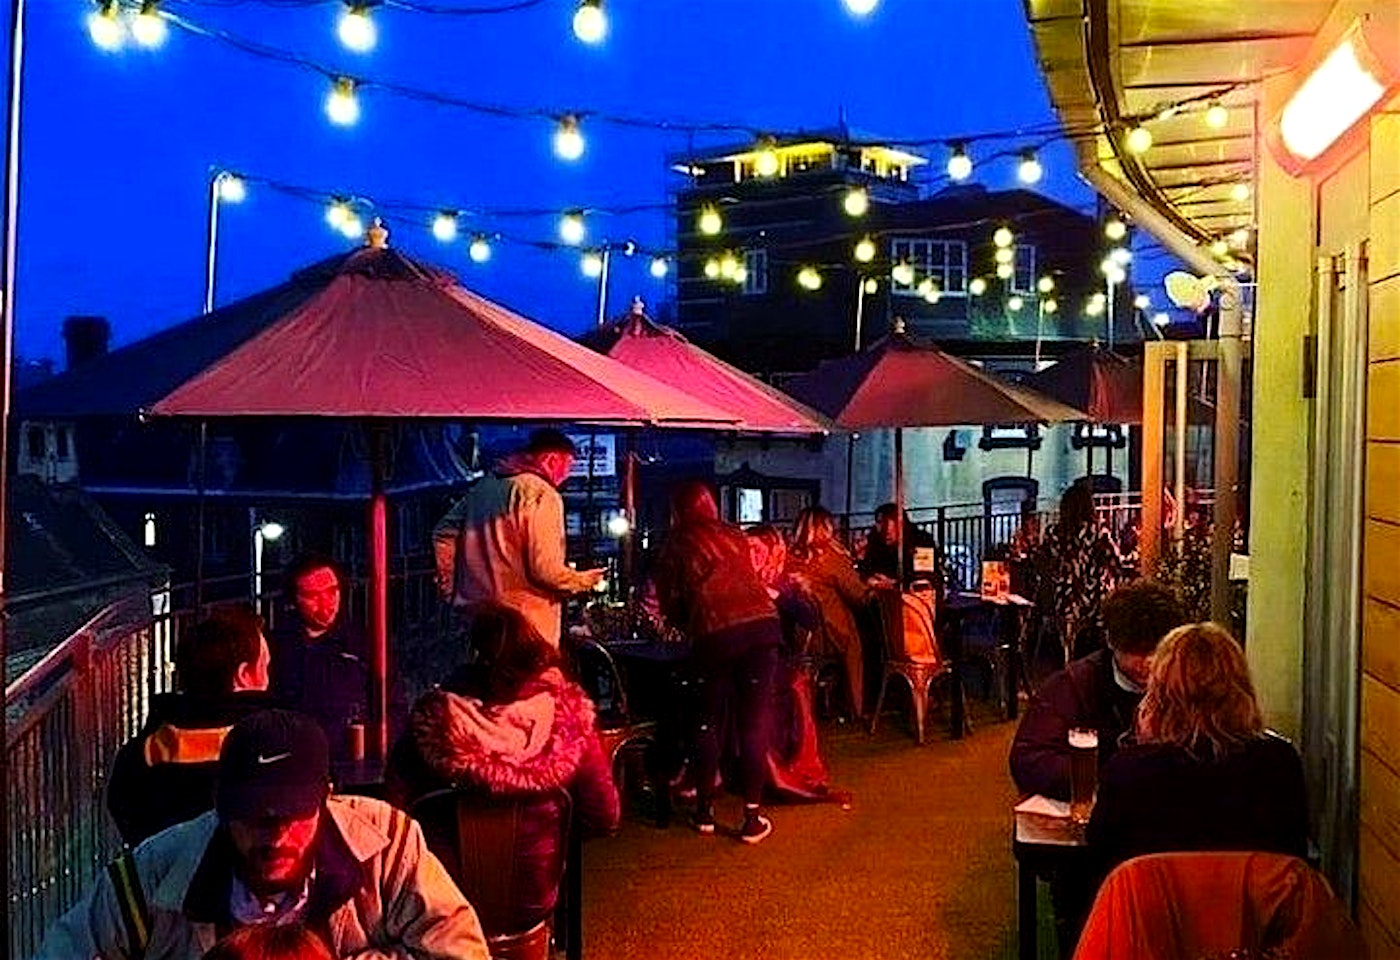 The rooftop bar at Zero Degrees' Bristol location